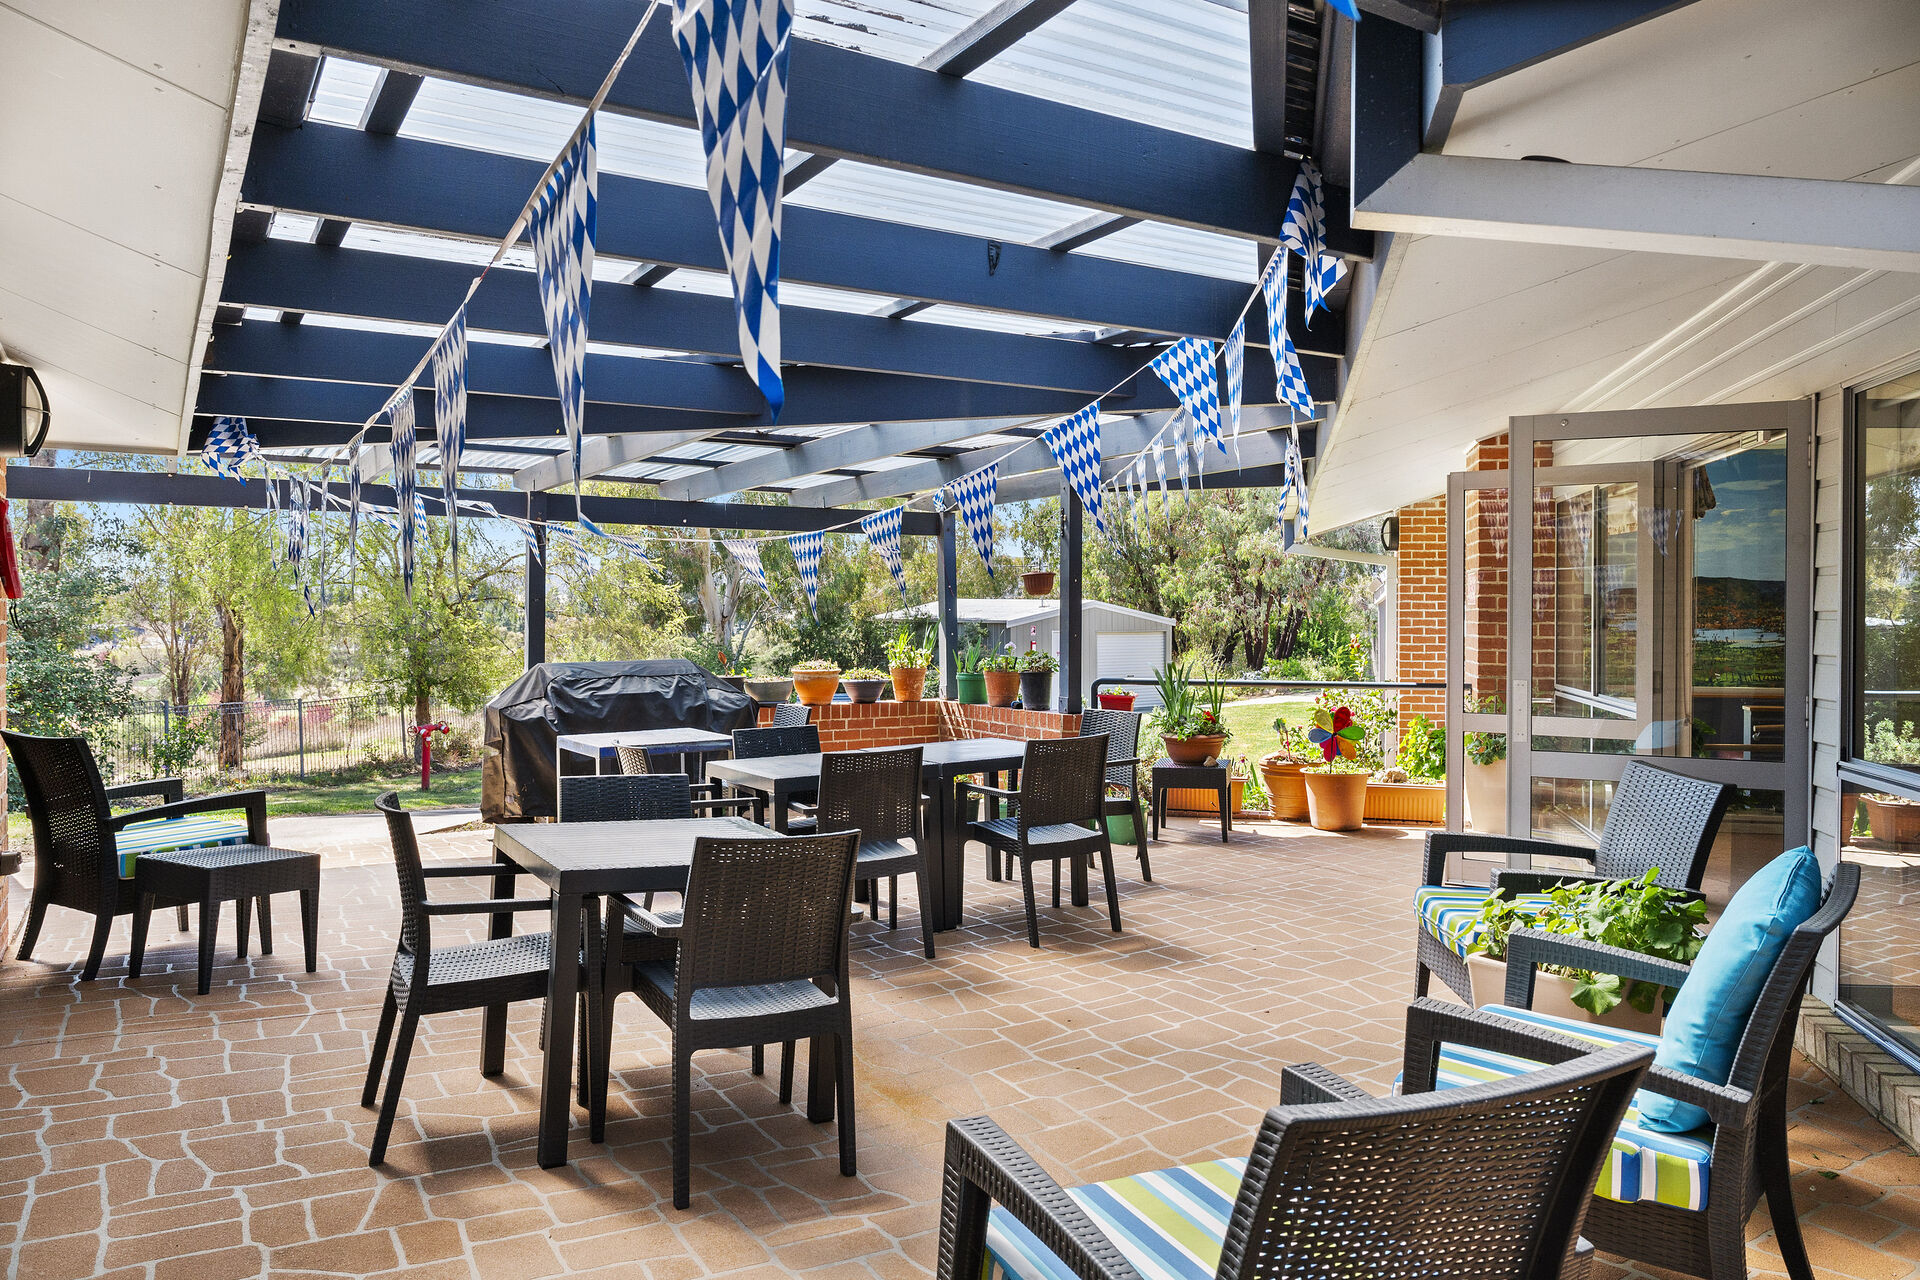 spacious outdoor sitting area under an awning of george forbes aged care home with dementia care in Queanbeyan nsw